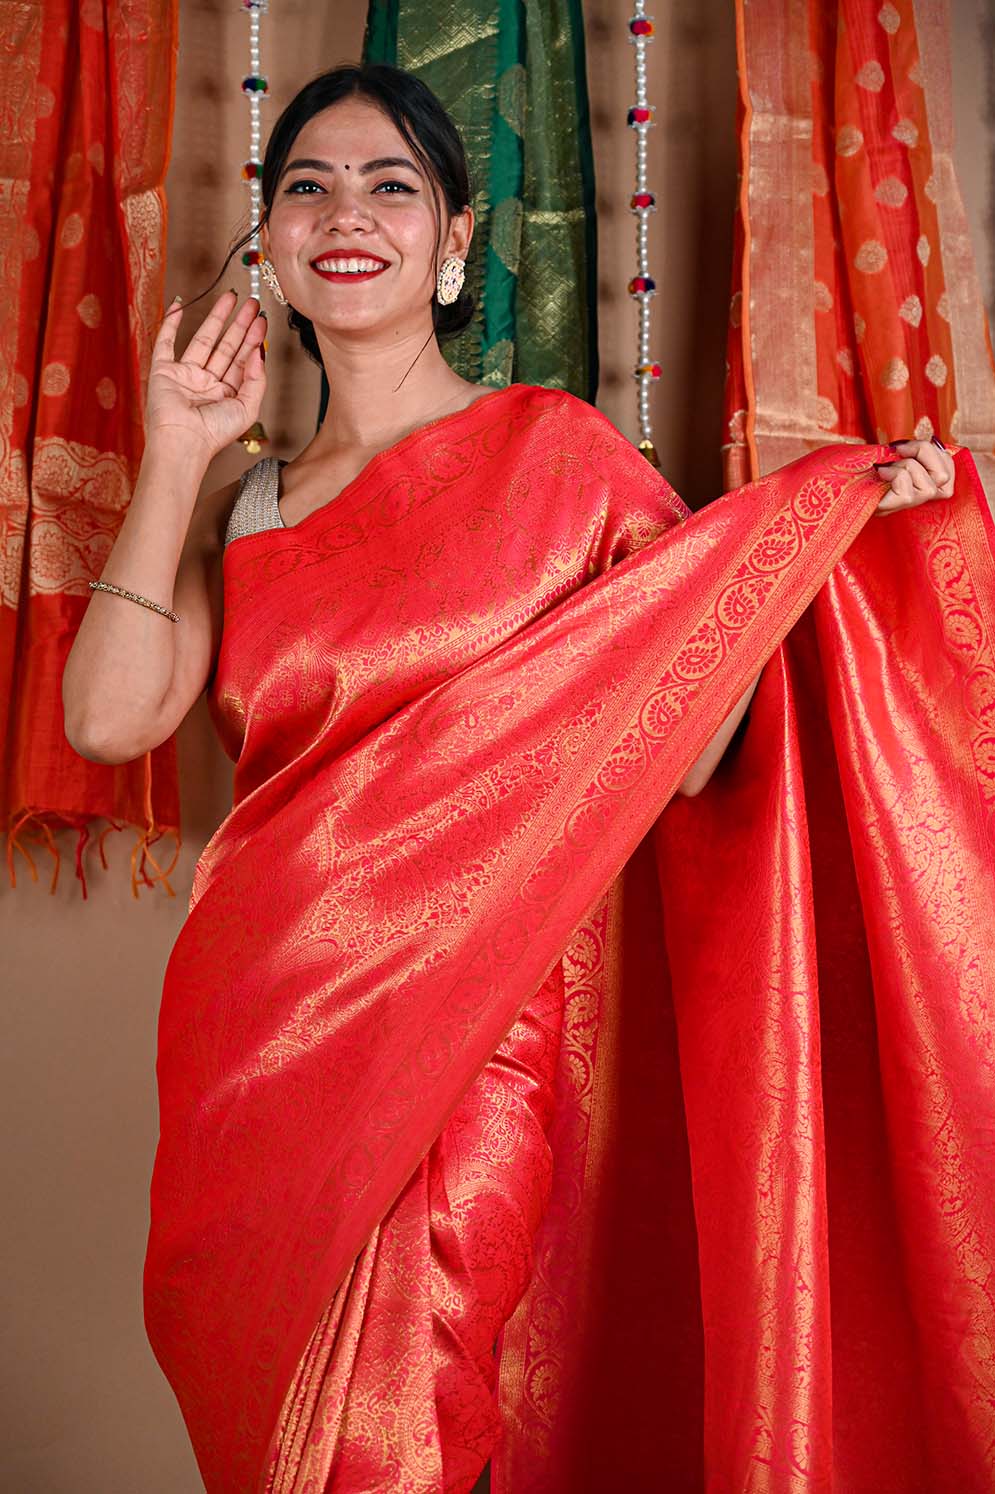 Ready To Wear Festive Rich Kanchipuram Red Dhoop Chaanv Wrap in 1 minute saree - Isadora Life